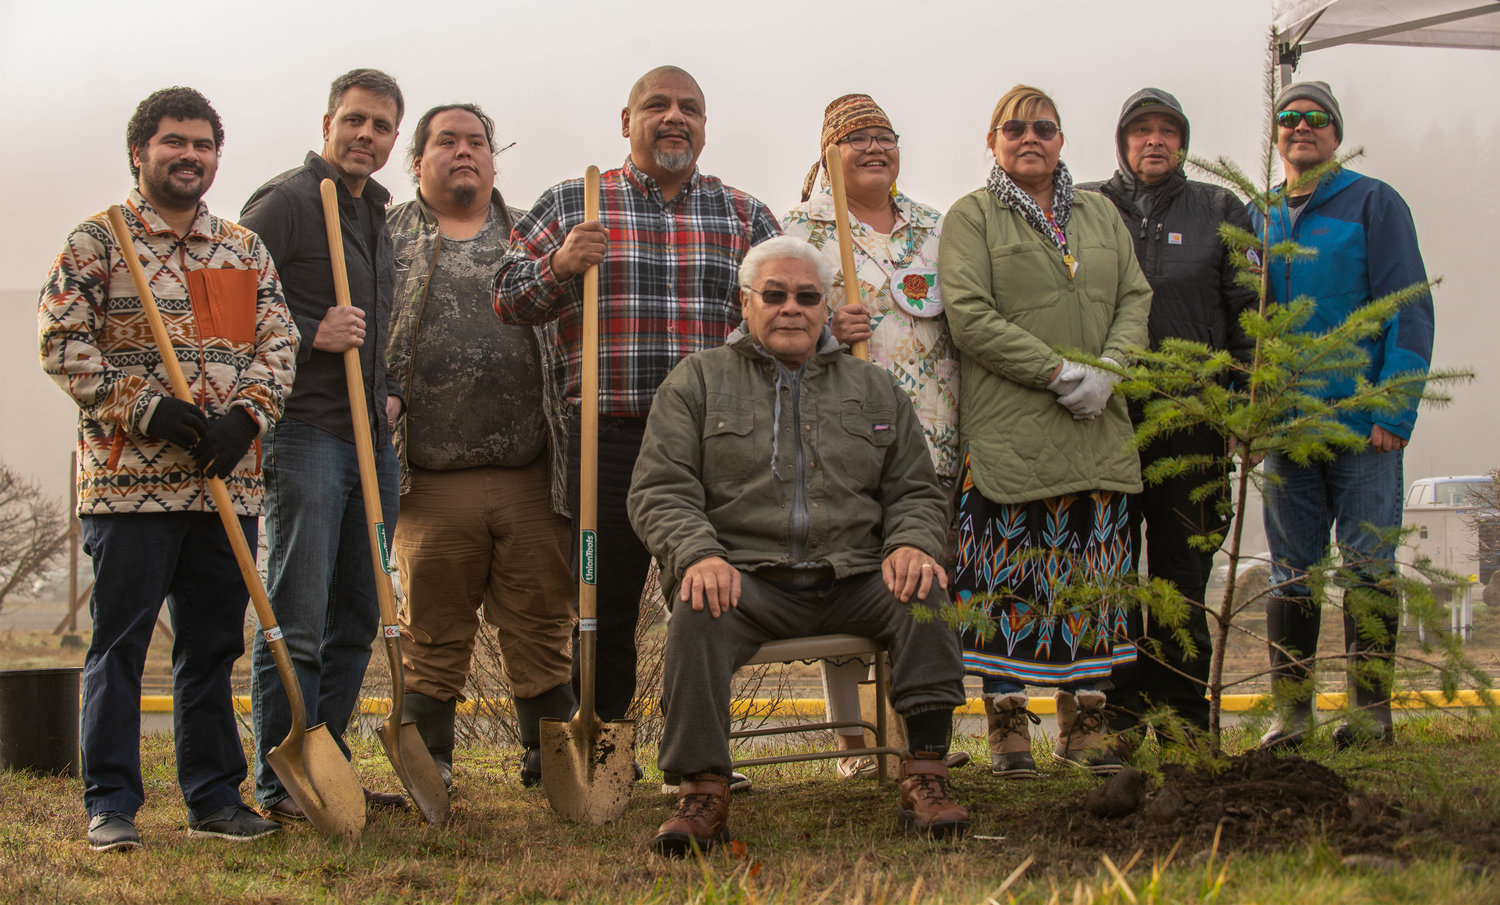 The 169th anniversary of the Treaty of Medicine Creek was celebrated by the original tribes involved during a tree planting ceremony on Jan. 20. Pictured in the front is Nisqually Tribal Elder Albert “Chief” Squally. Starting on the left is Nisqually Tribal Council member Guido Levy, Squaxin Island Tribal Council Chairman Chris Peters, Squaxin Island Tribal Council secretary Patrick Braes, Puyallup Tribal Council member Fredd Dillon, Nisqually Tribal Council Vice Chair Antonette Squally, Nisqually Tribal Council secretary Jackie Whittington and Nisqually Tribal members and employees Robert Thomas and Willy Squally, who aided with planting preparations.